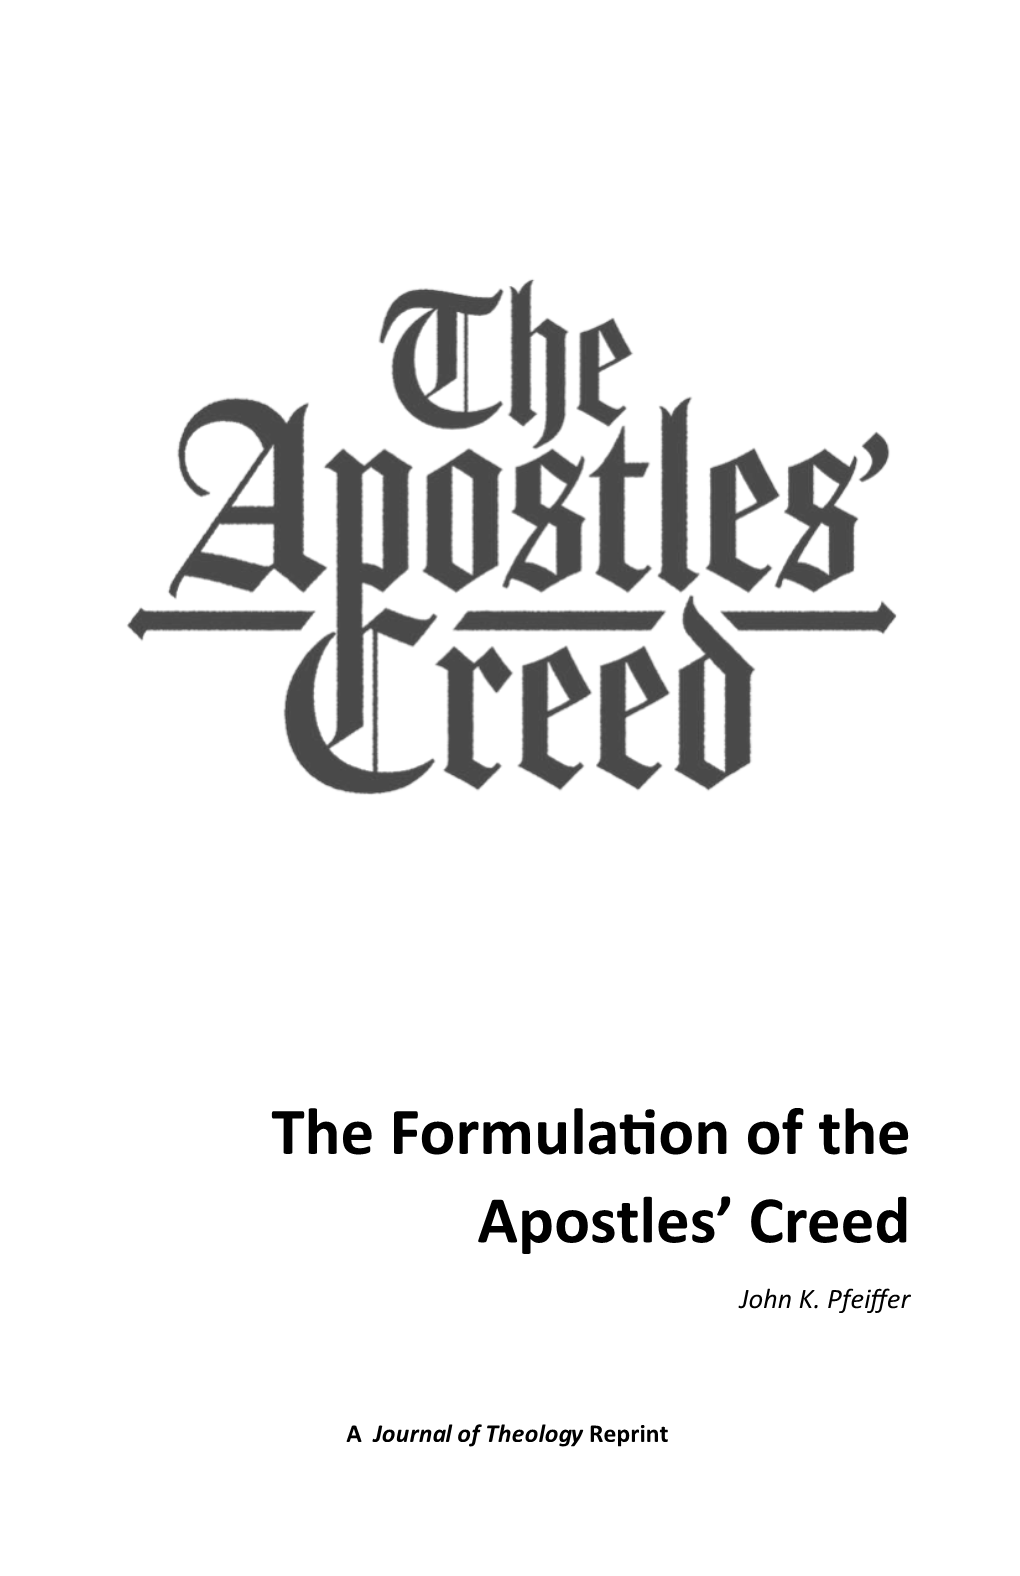 The Formulation of the Apostles' Creed